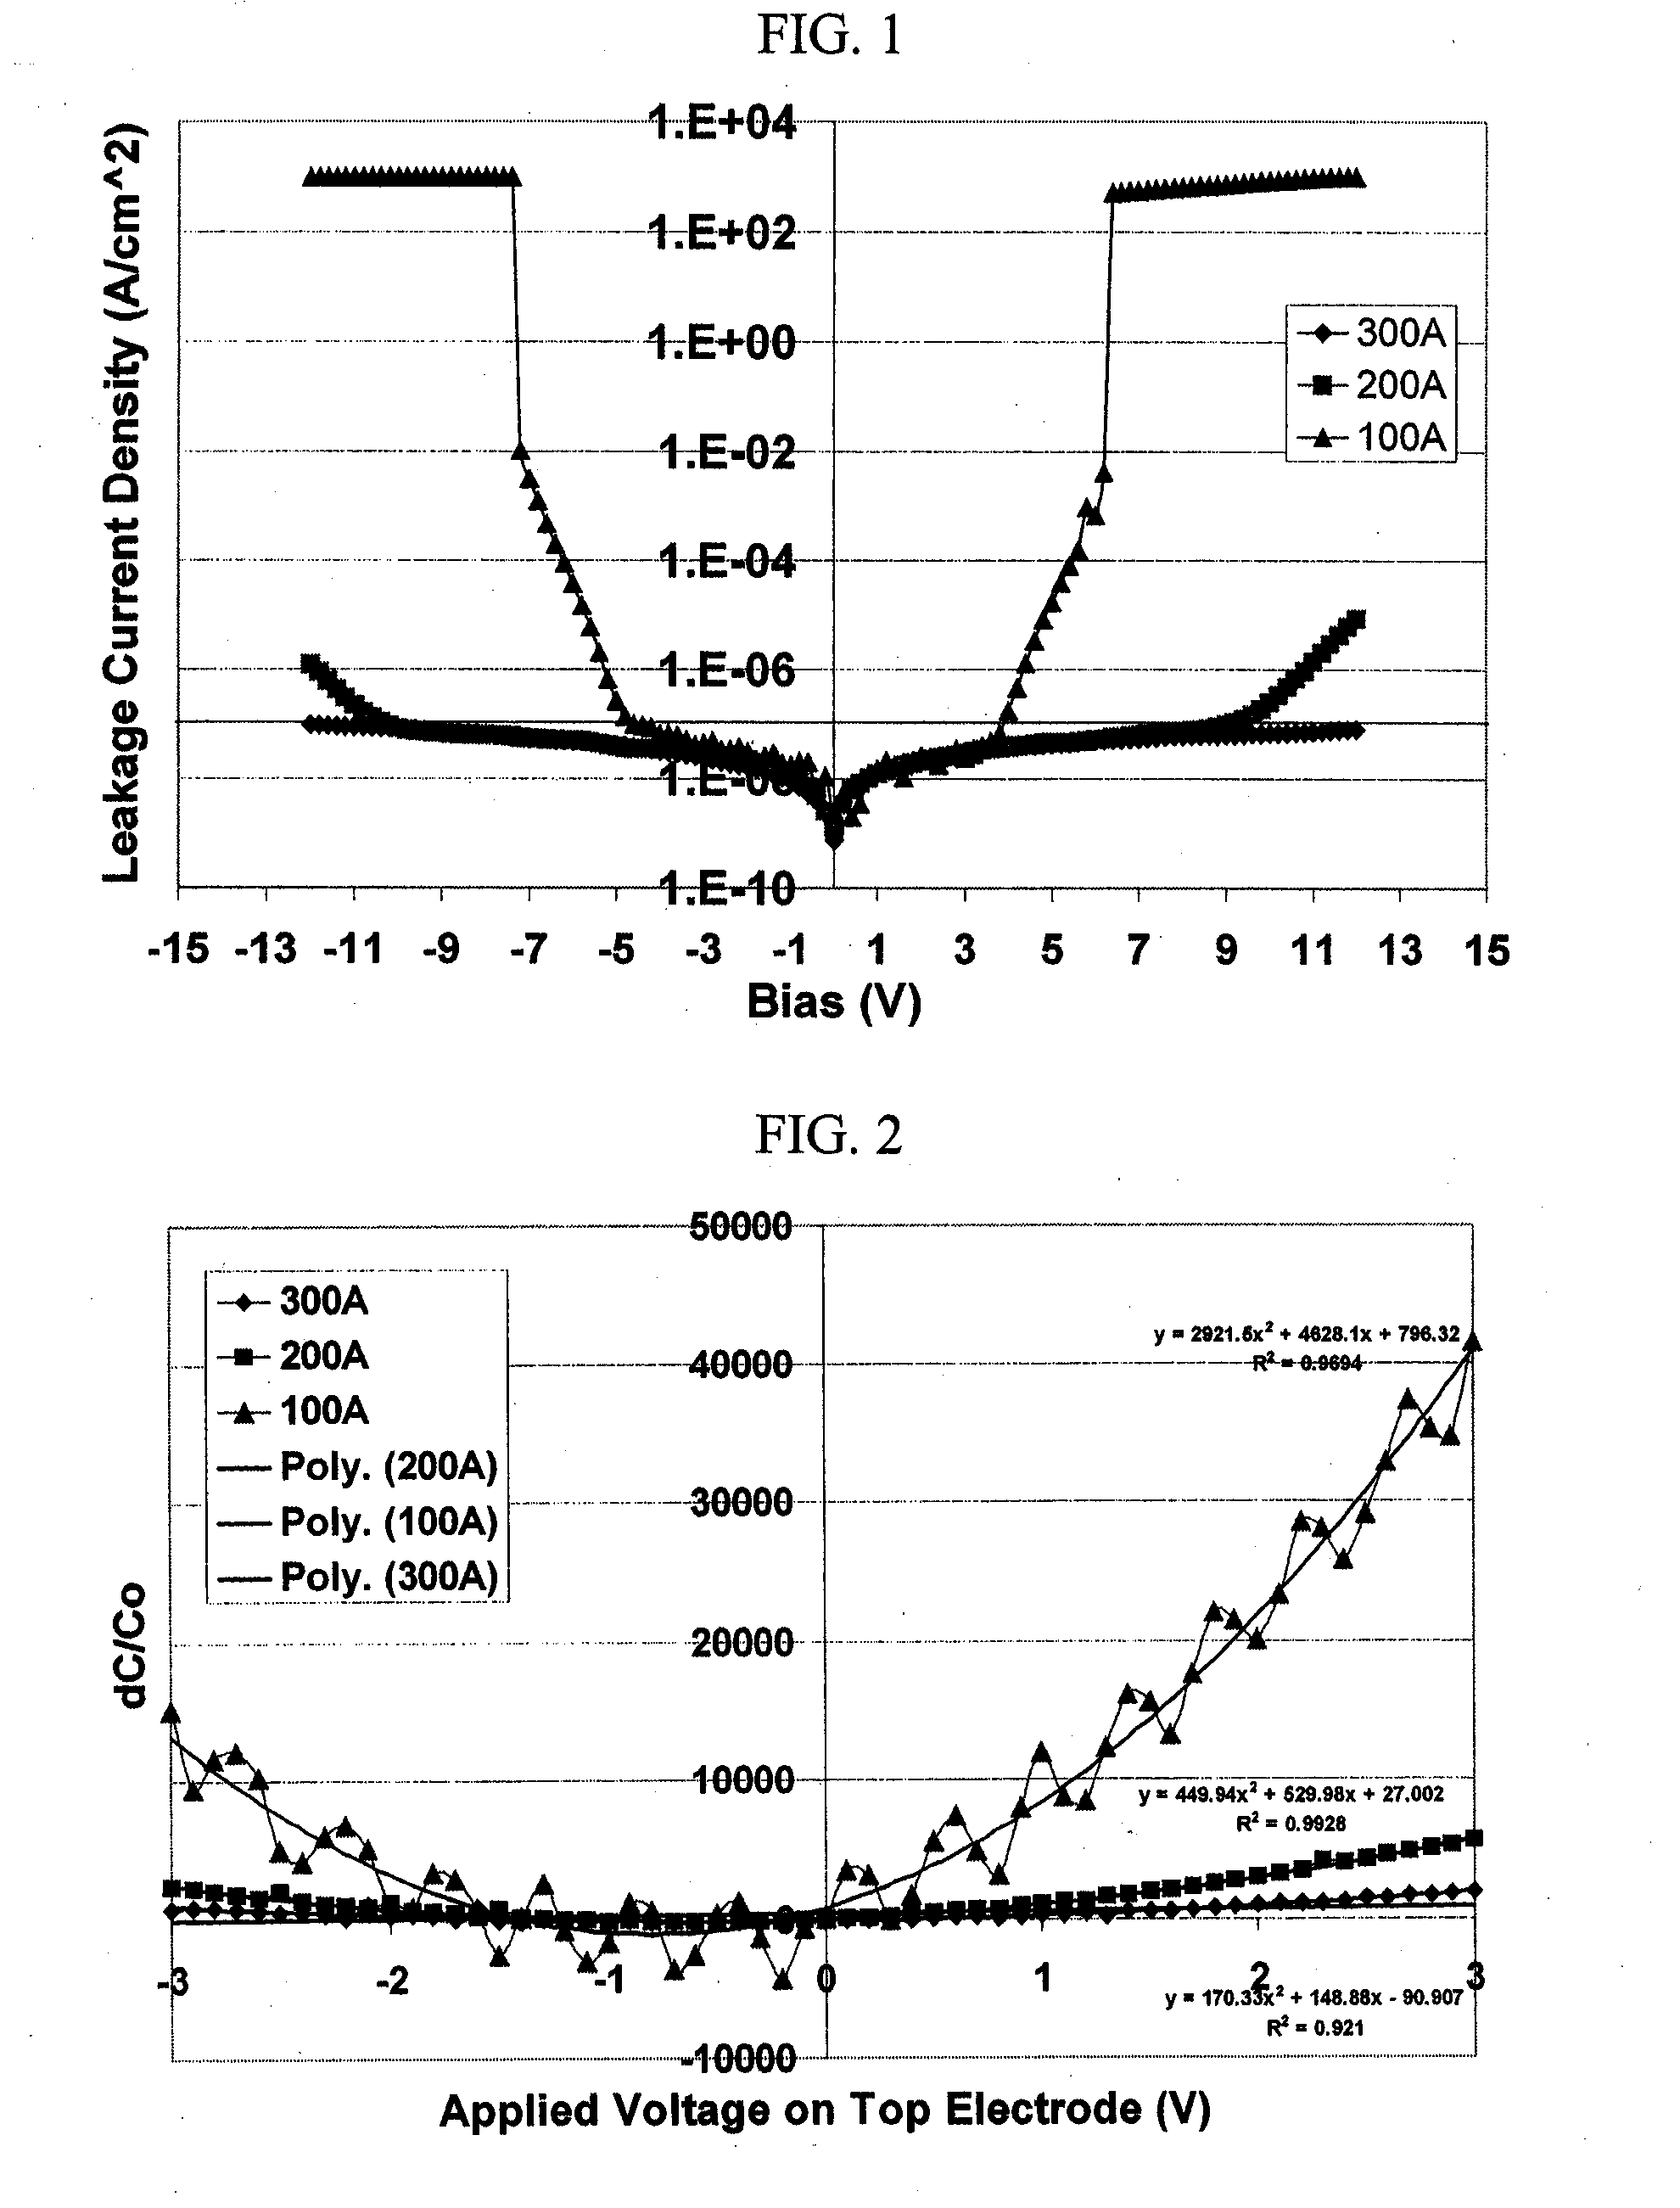 High density mimcap with a unit repeatable structure